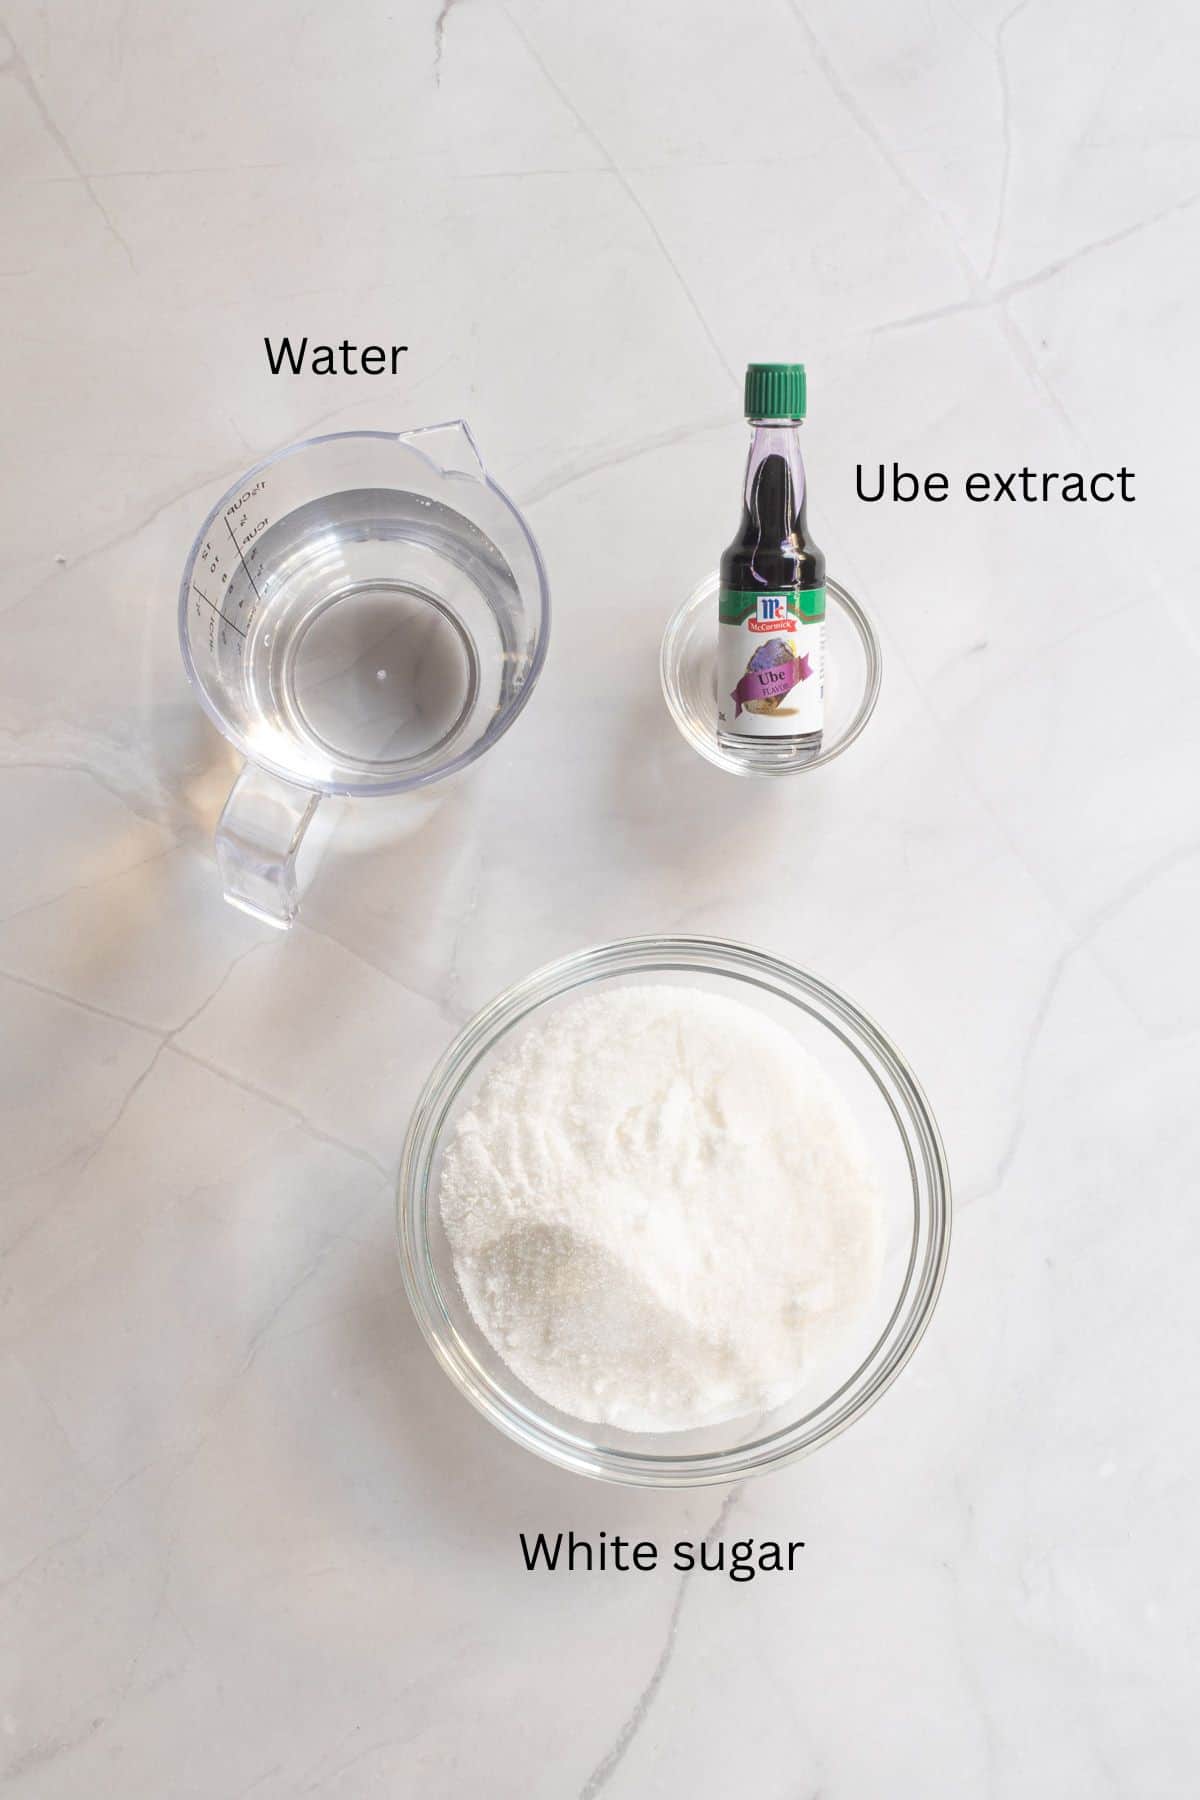 Water, sugar and ube extract against a marble background.